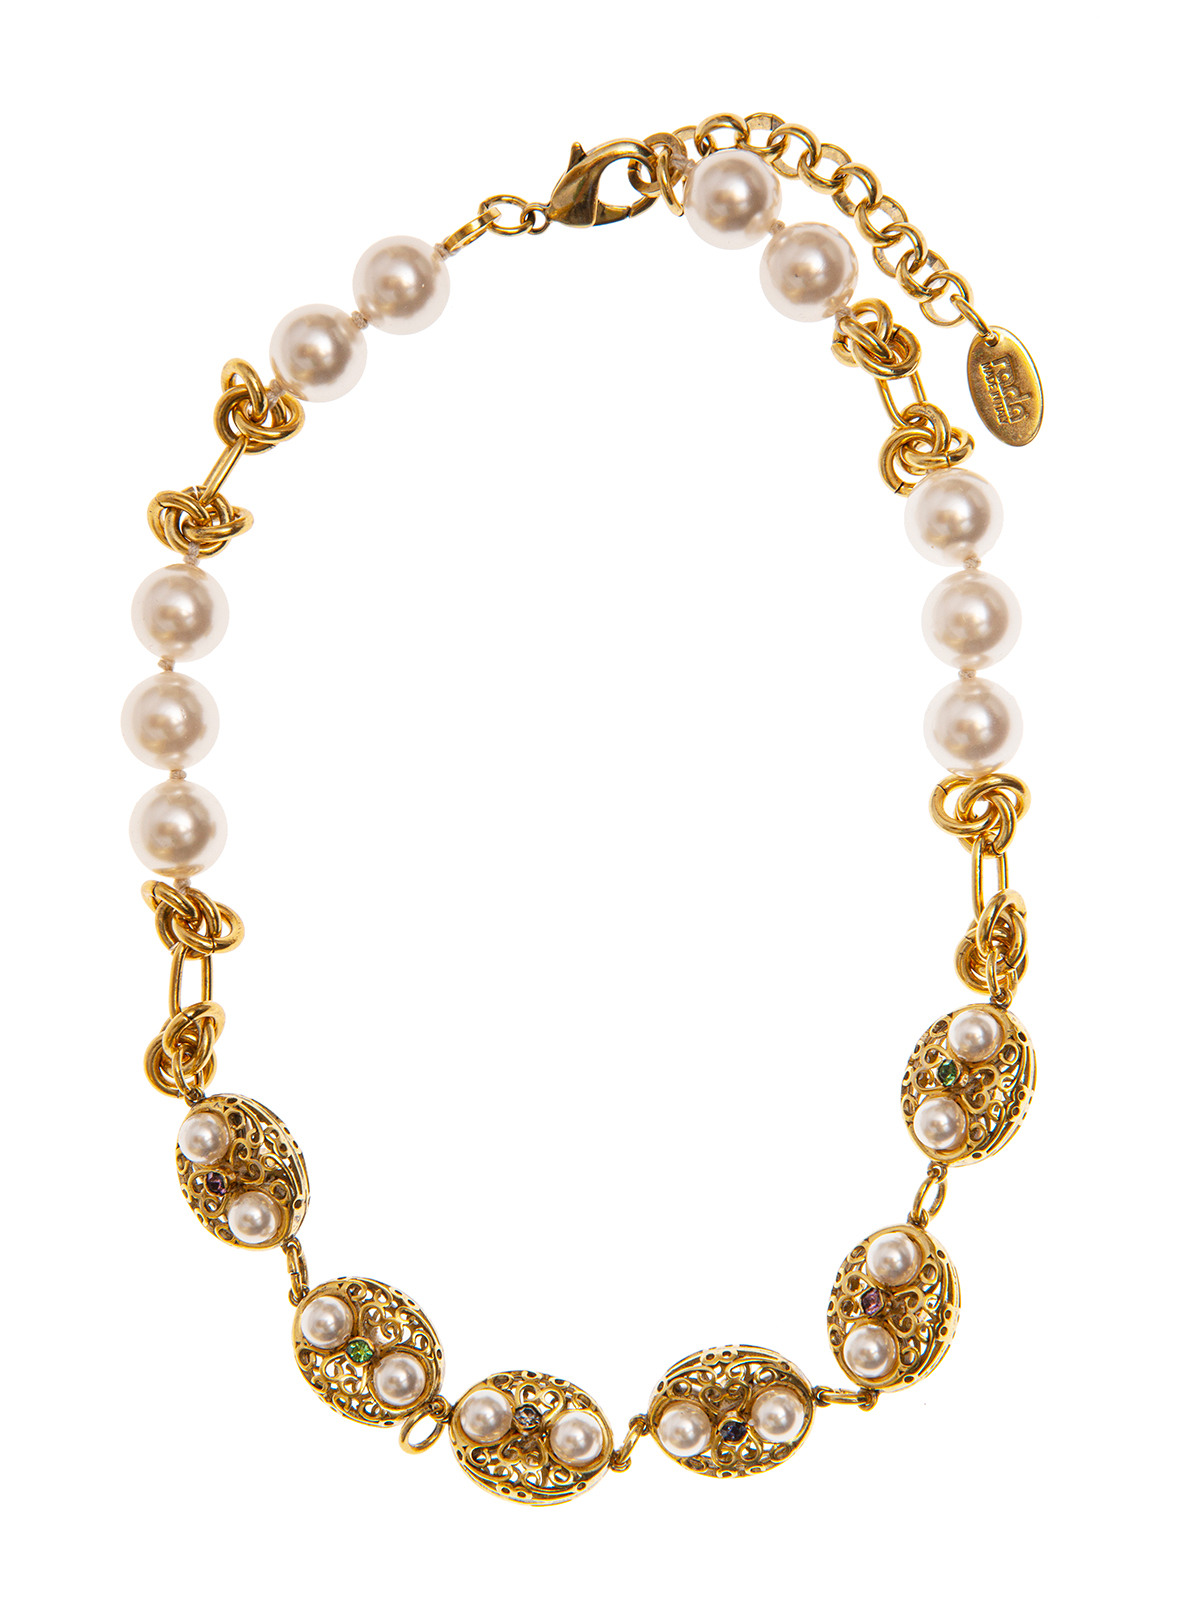 Pearl and  chain necklace embellished with filigrees and multicolor stones